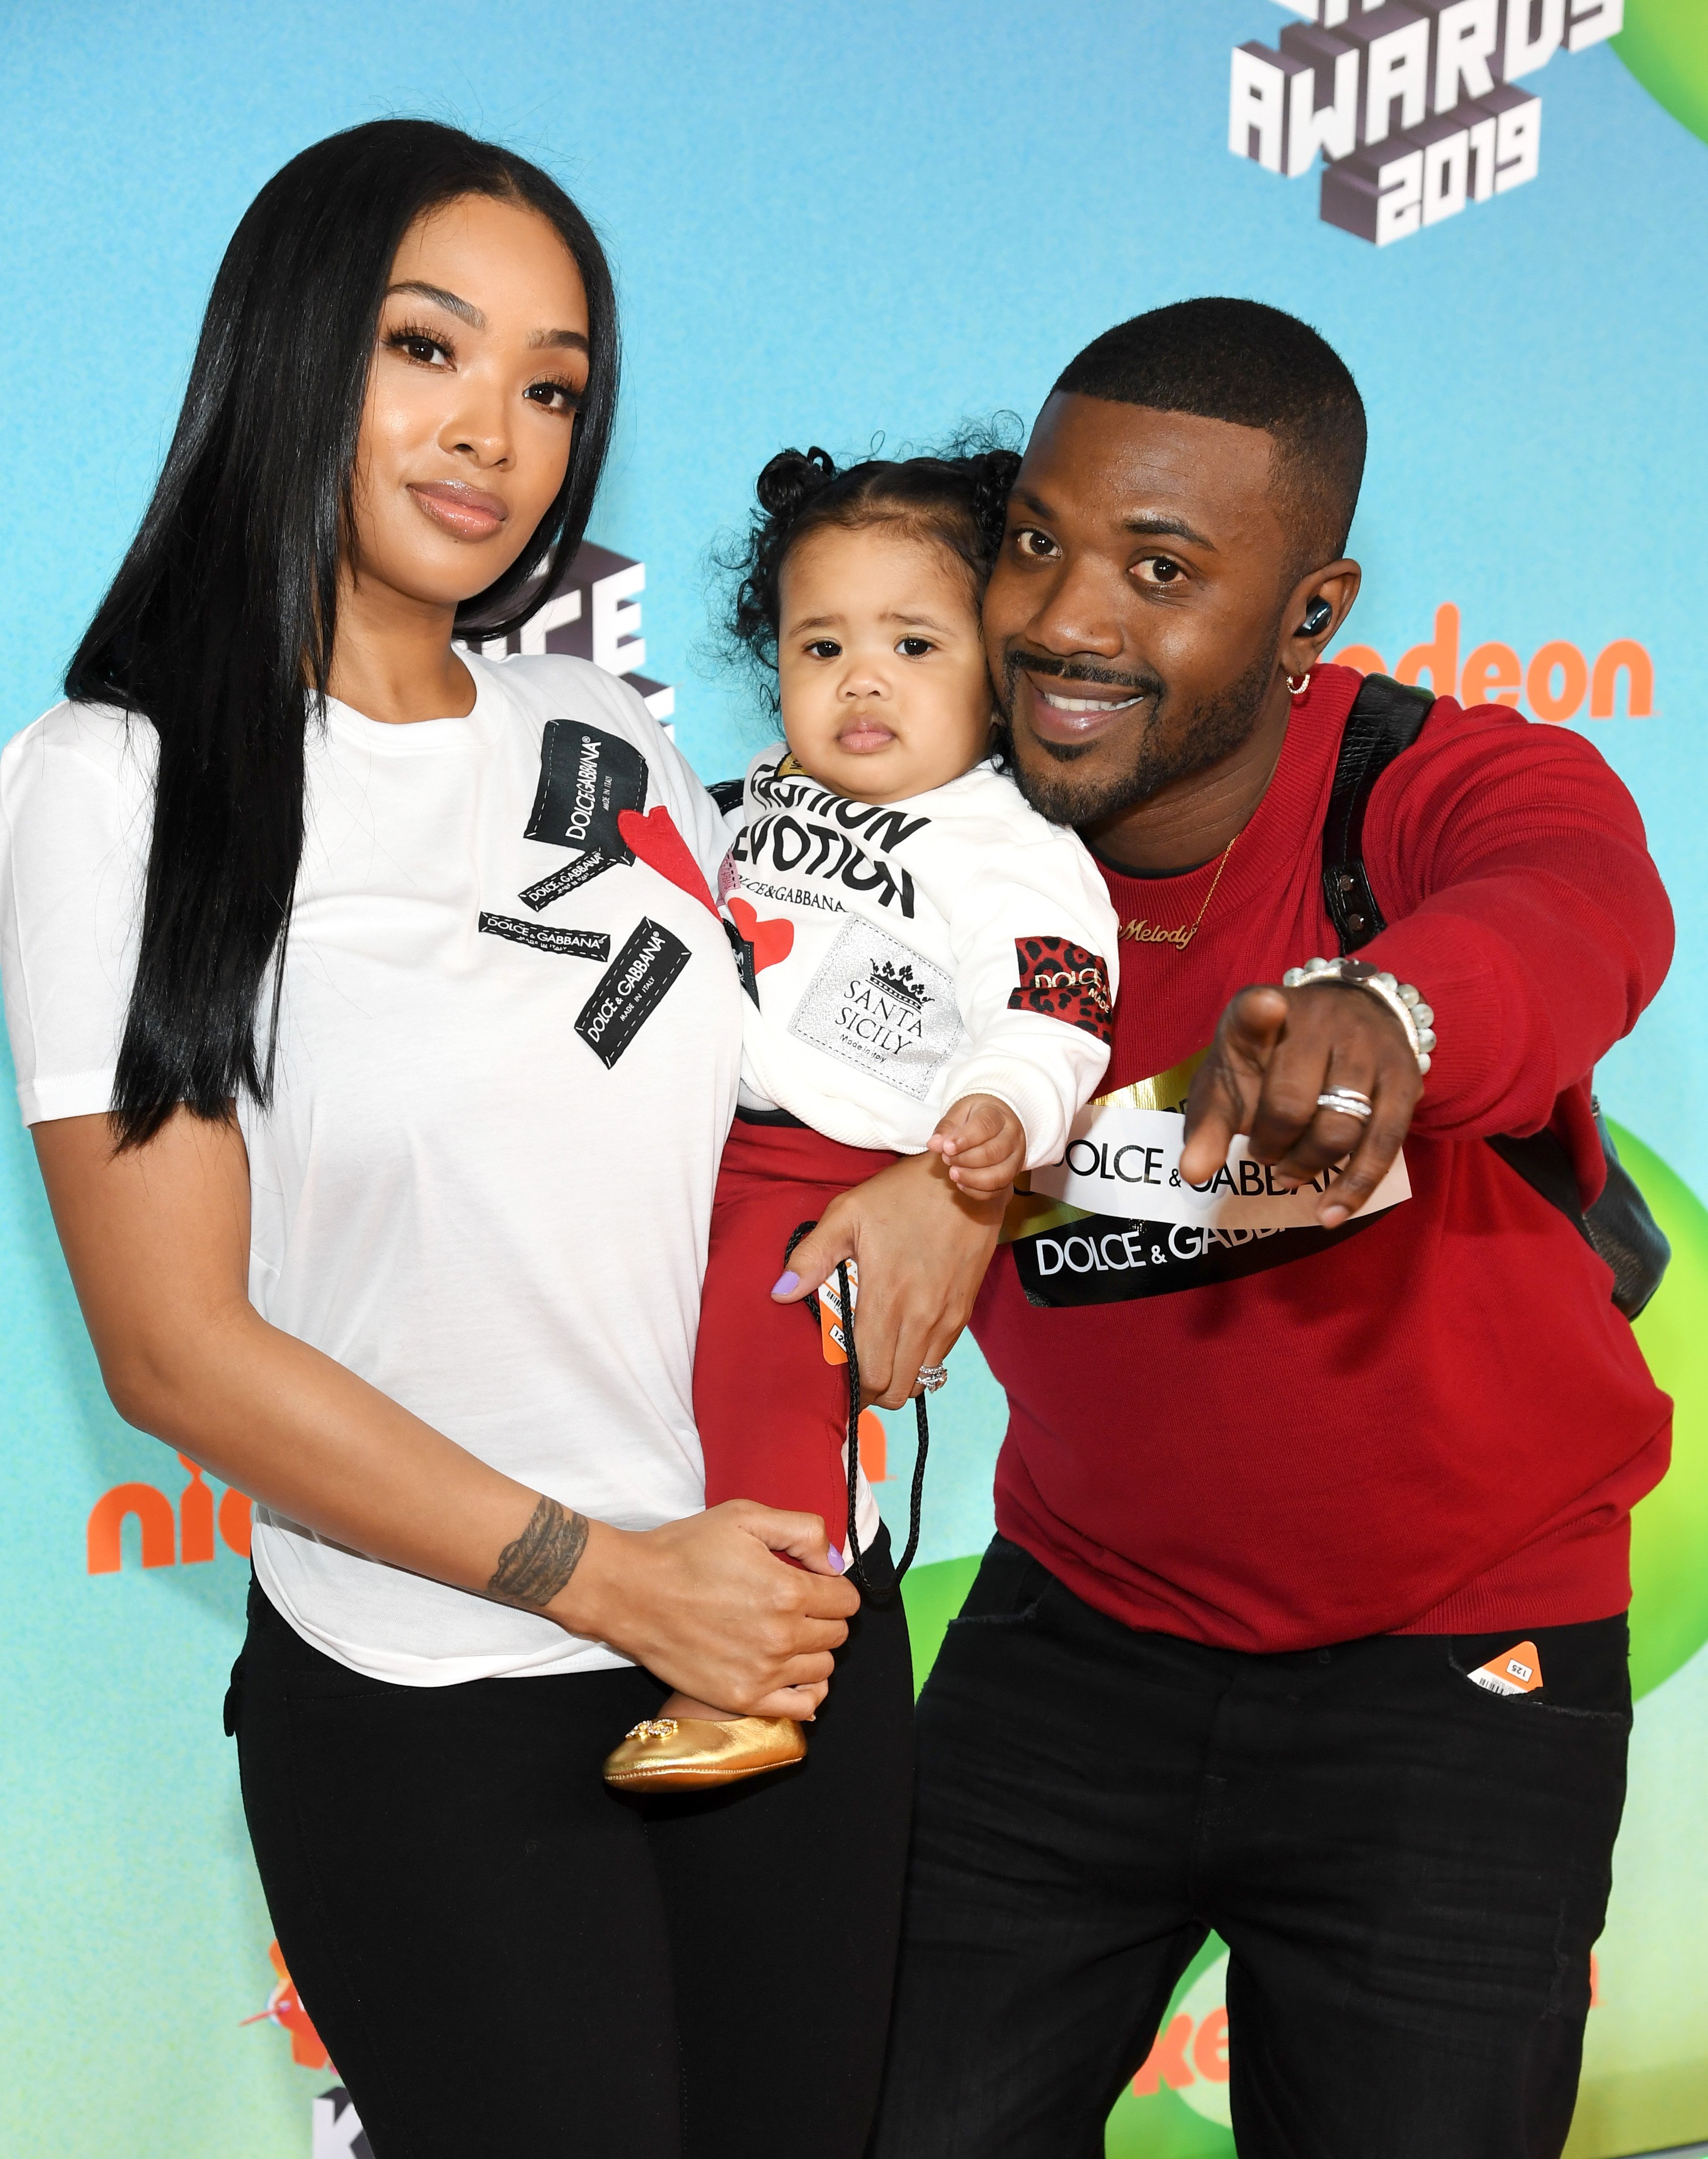 Princess Love, Melody Norwood and Ray J attending the 2019 Kids' Choice Awards in March 2019. | Photo: Getty Images